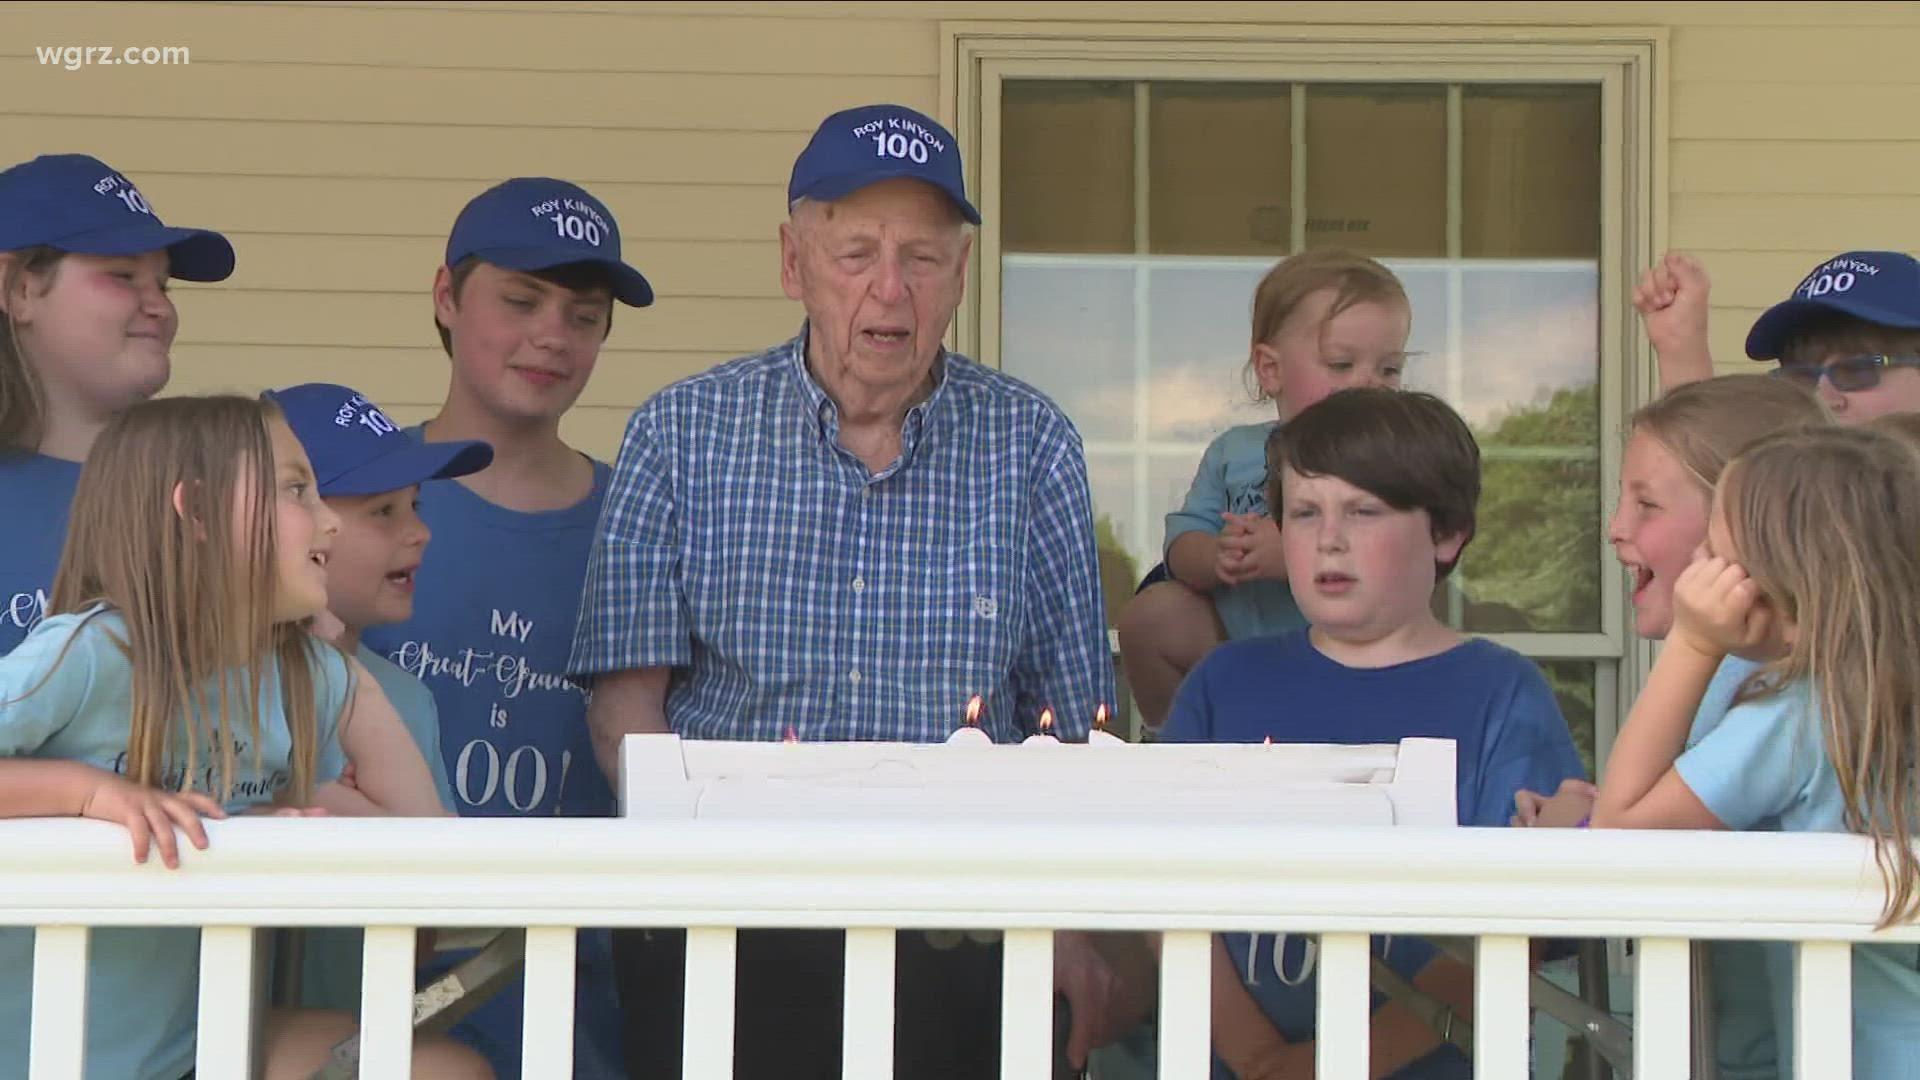 WWII Navy veteran is celebrating a milestone birthday this weekend. Roy Kinyon from Lockport is turning 100!